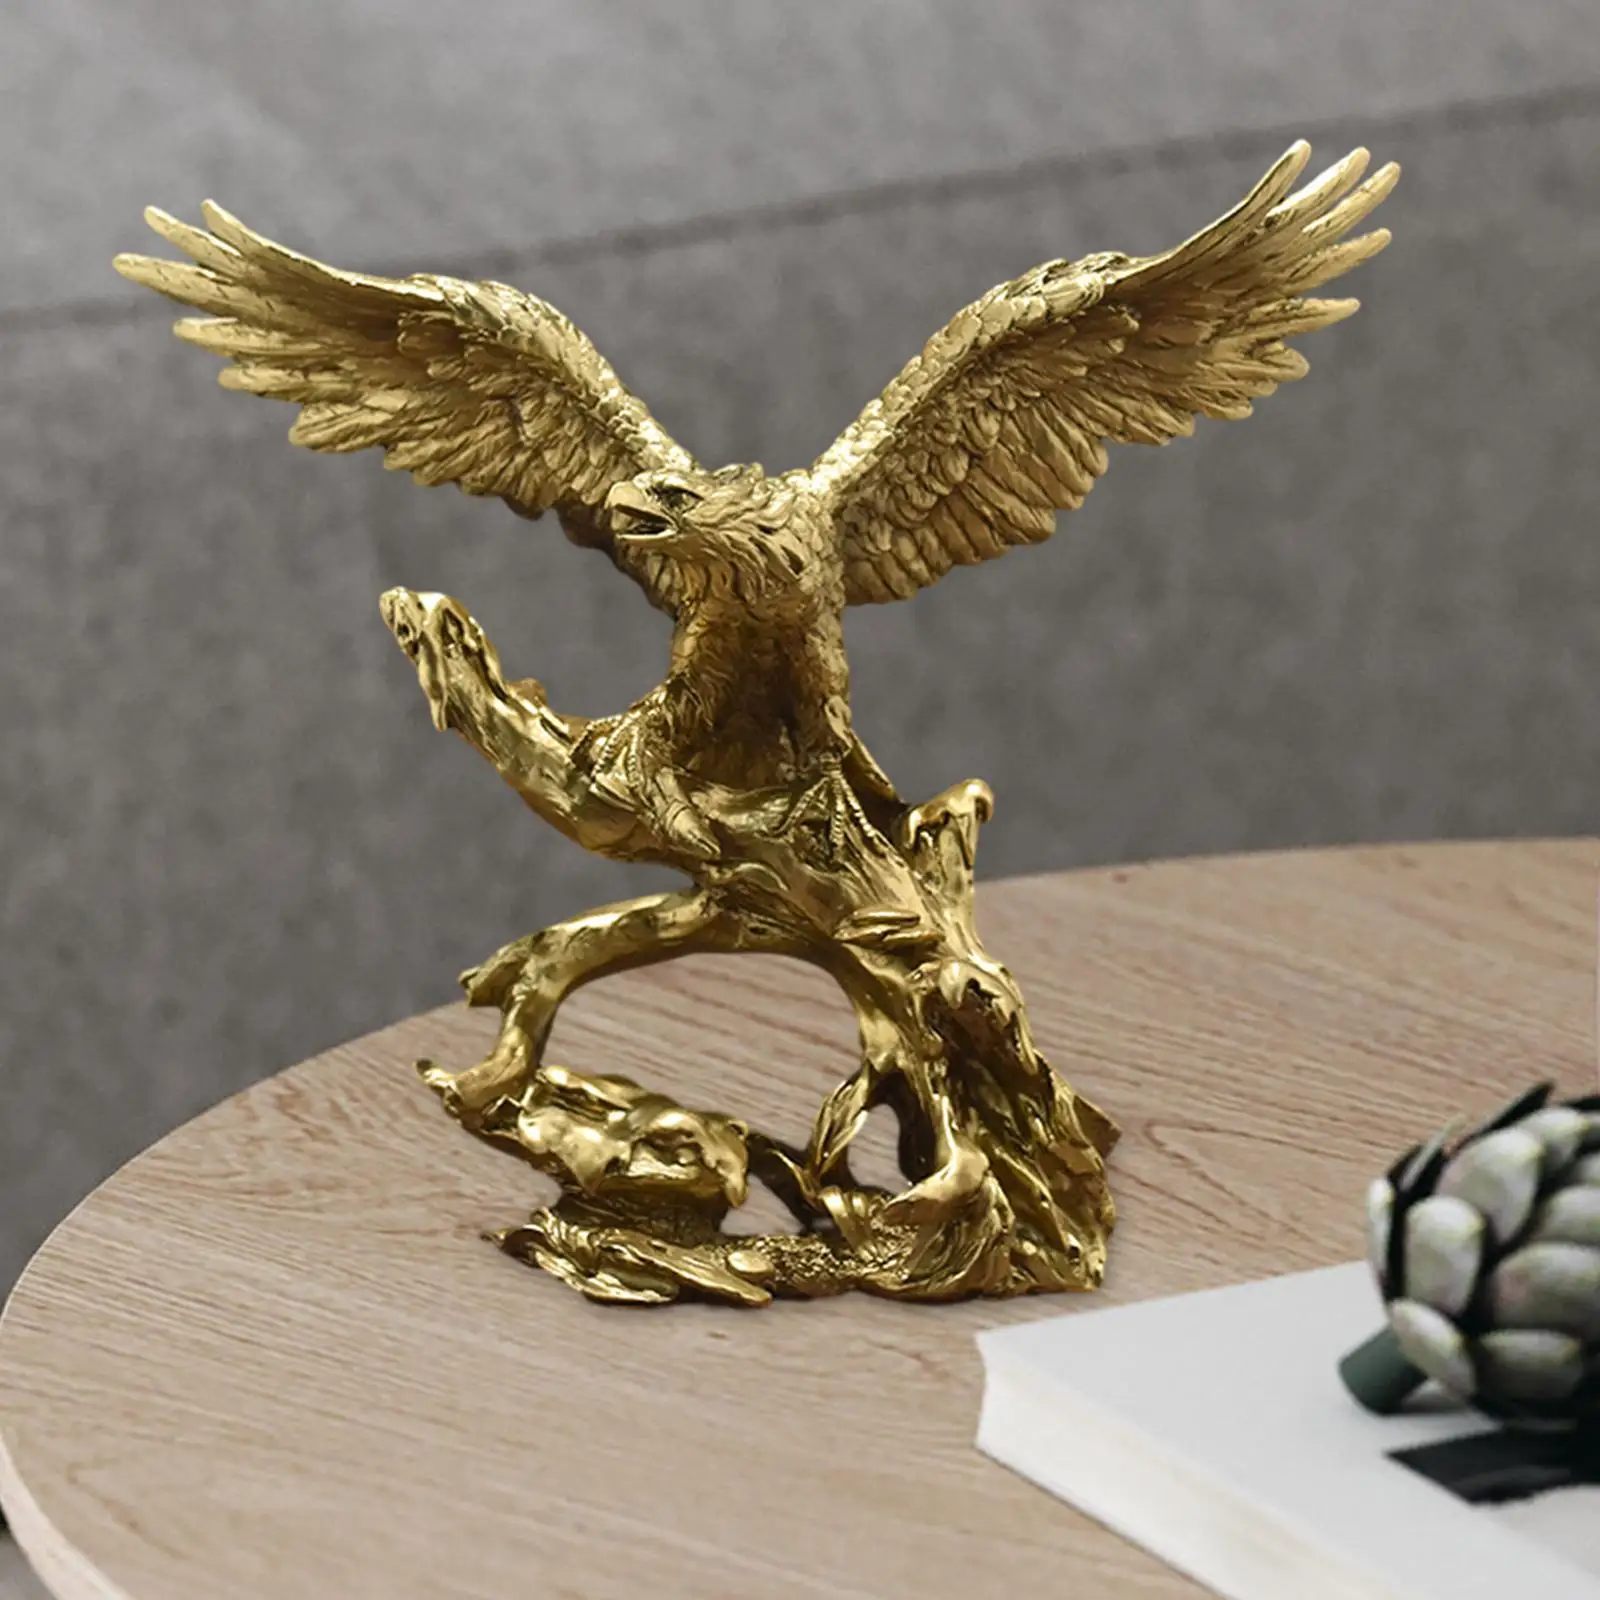 

Eagle Figurine Lucky Creative Gift Collection Statue Animal Sculpture Ornament for Living Room Office Home Bookcase Tabletop